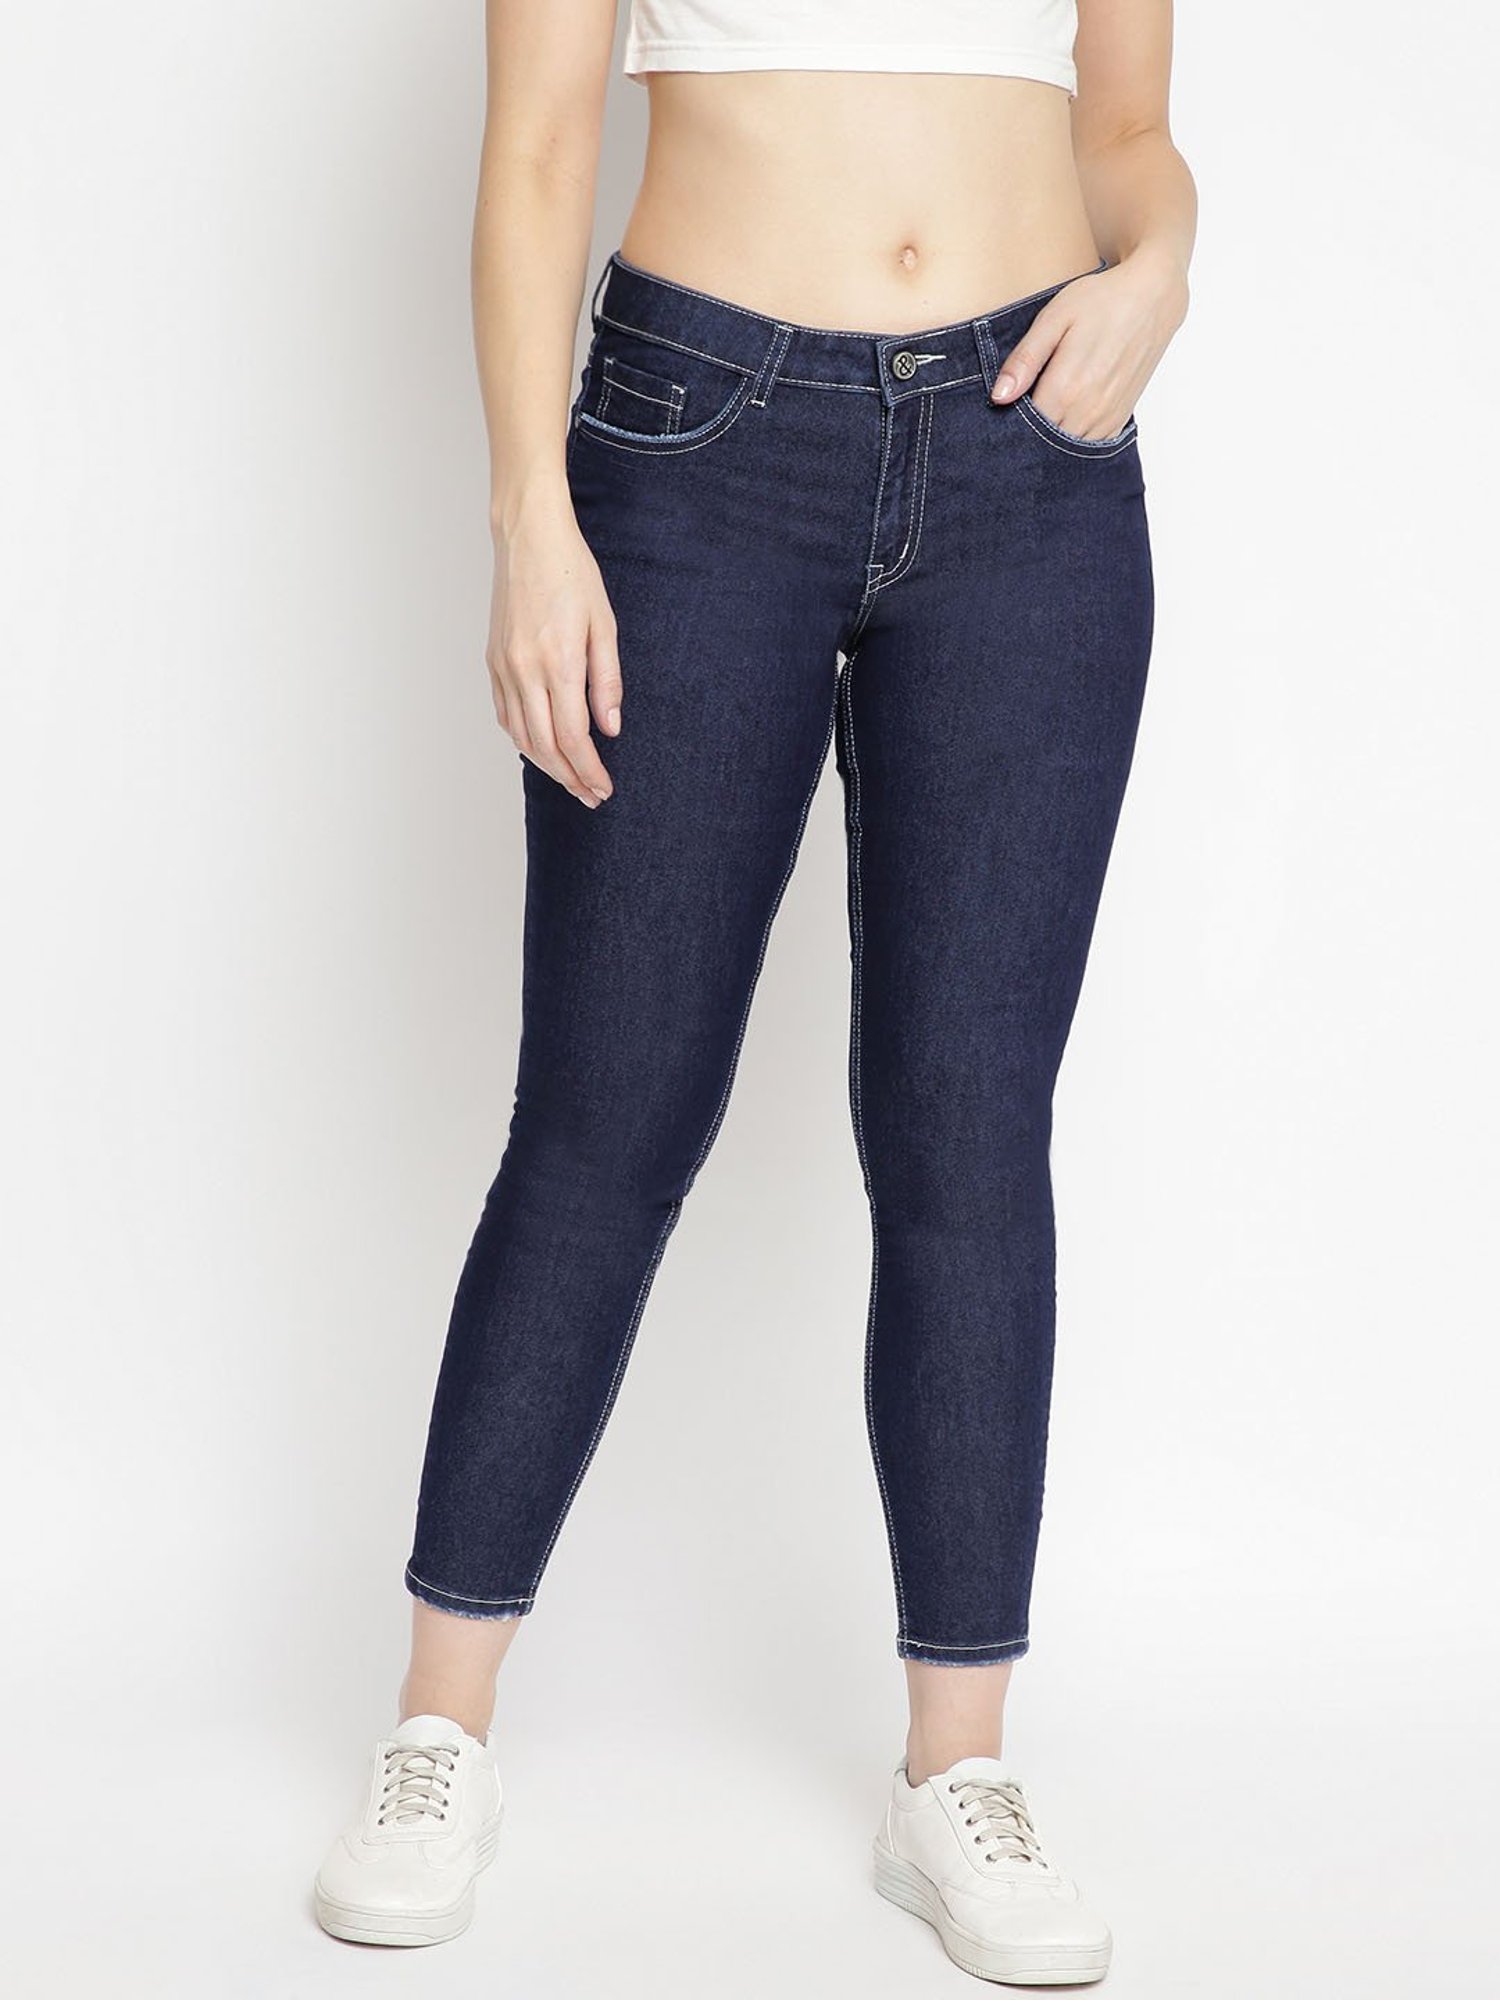 Buy Wholesale B2B DVG Women High Waist Jeans in india